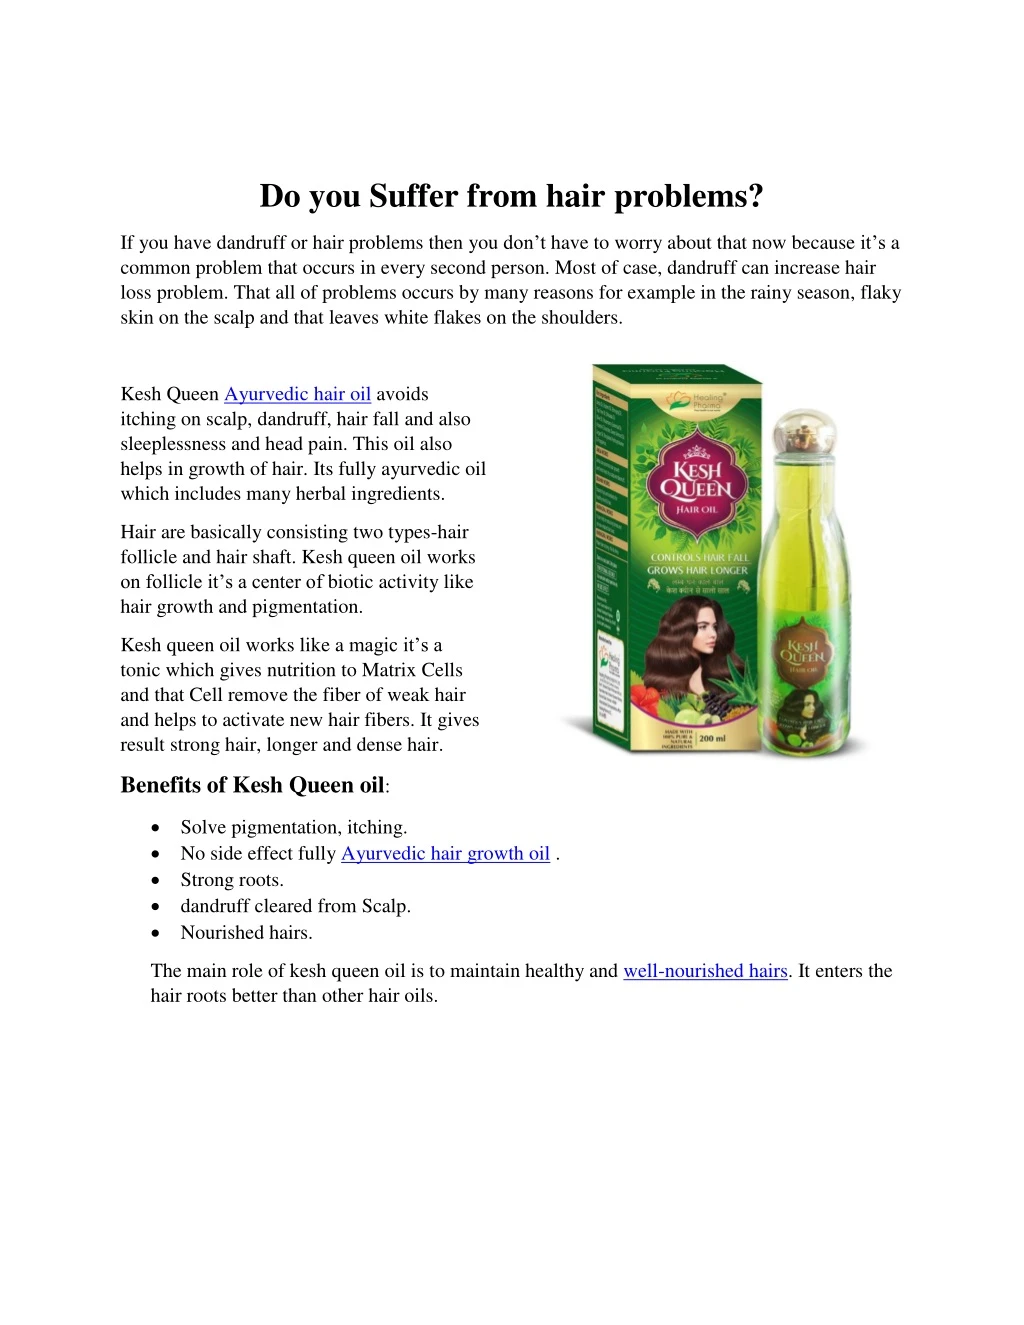 do you suffer from hair problems